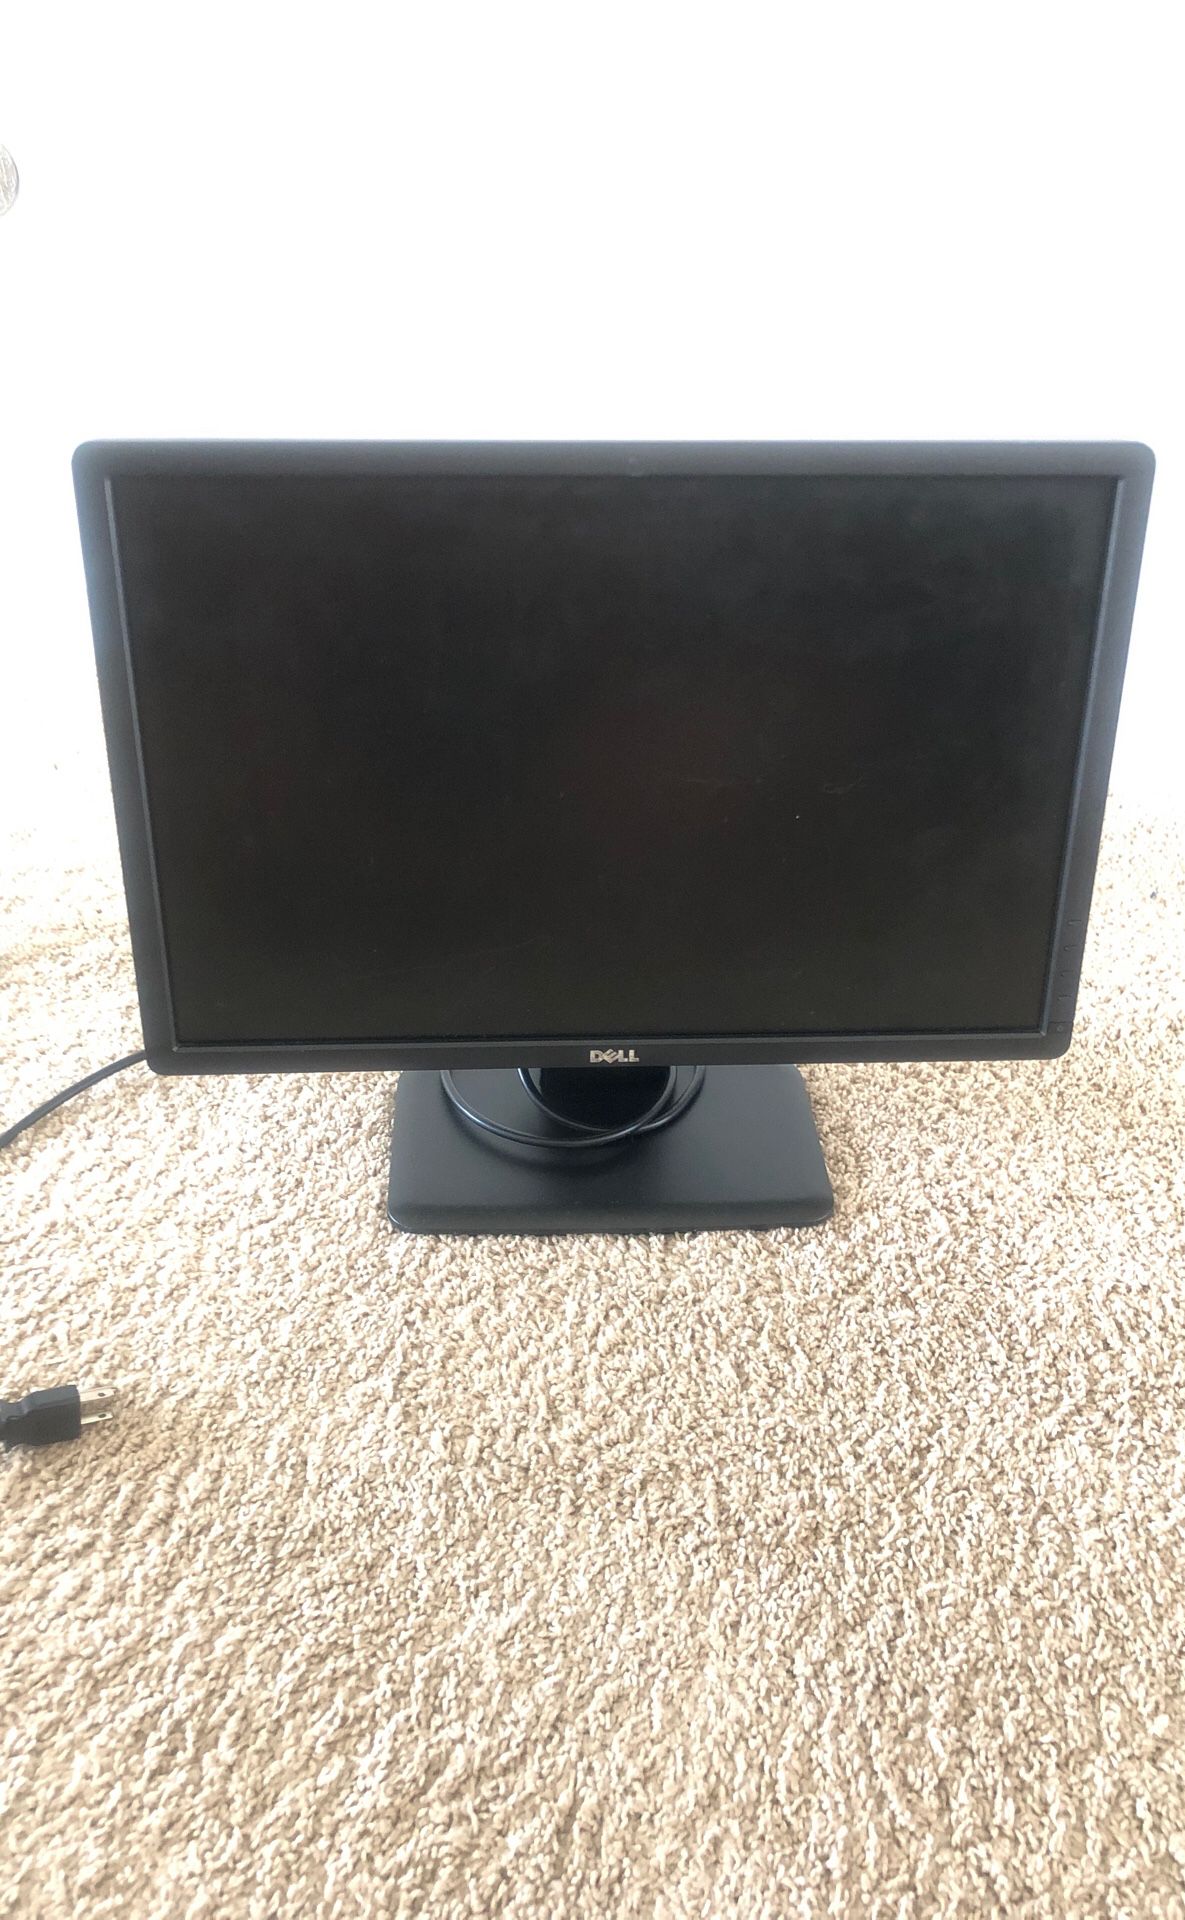 Dell Widescreen Flat Panel Monitor 27”